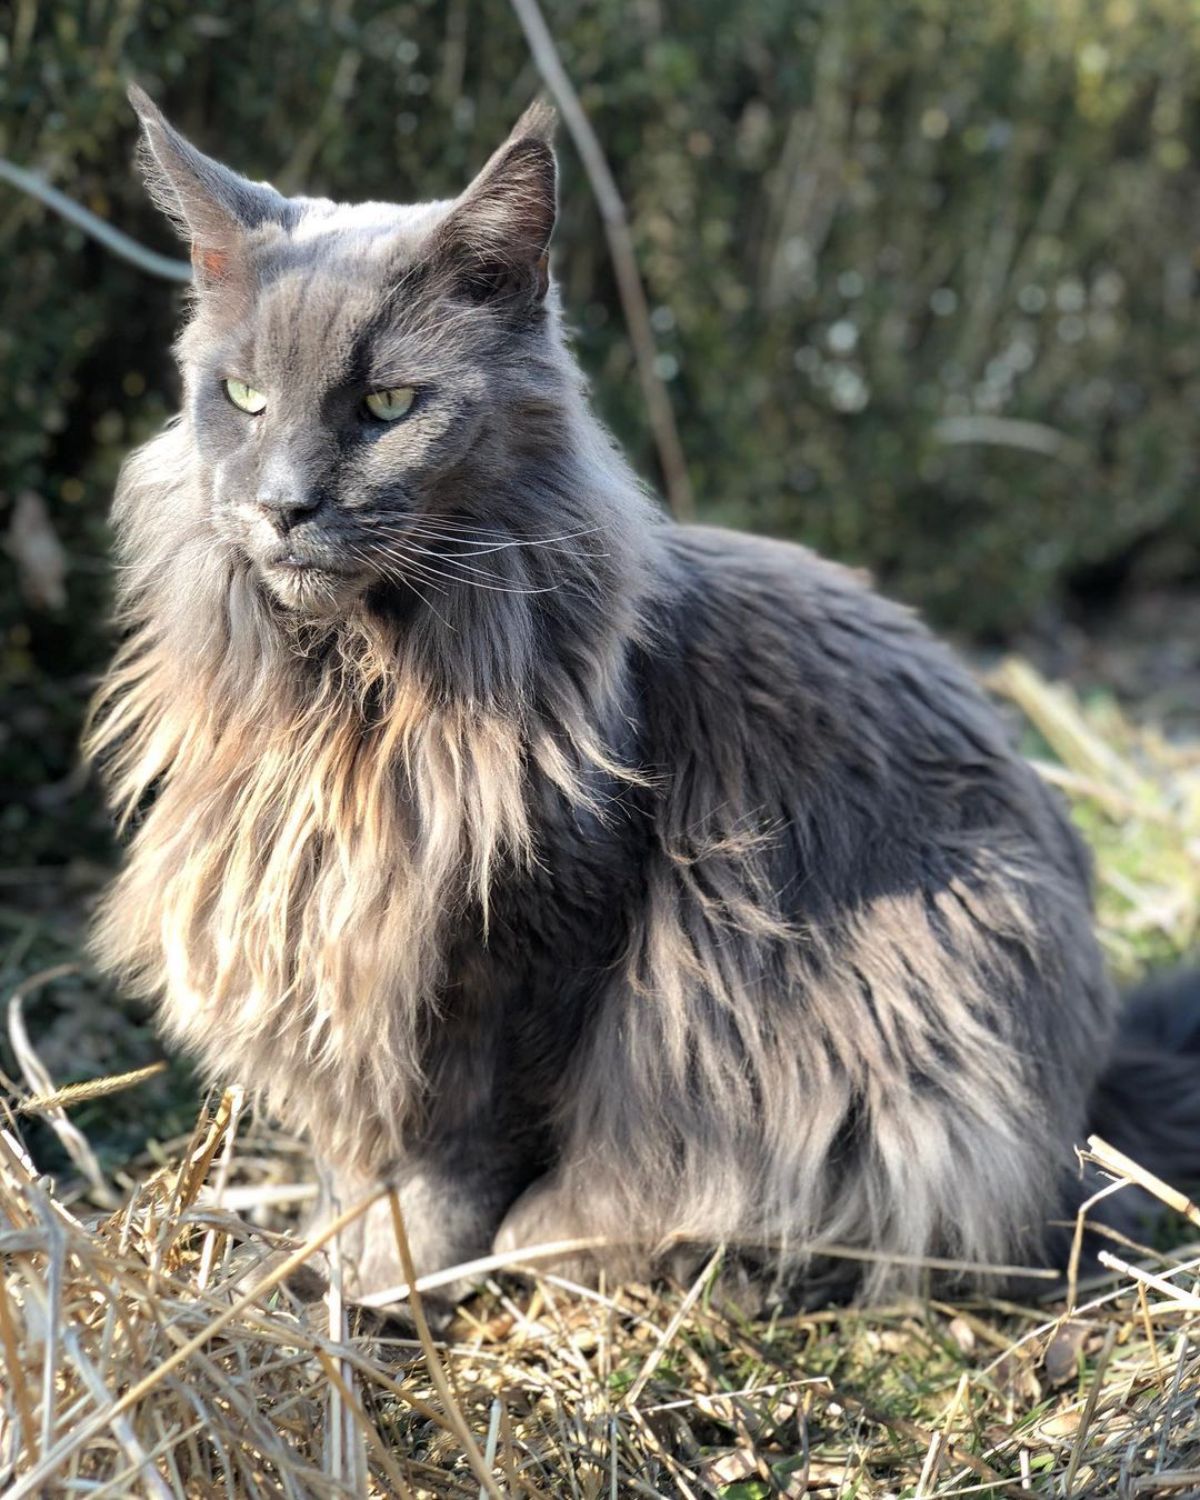 A big fluffy gray maine coon cat sitting on a straw.